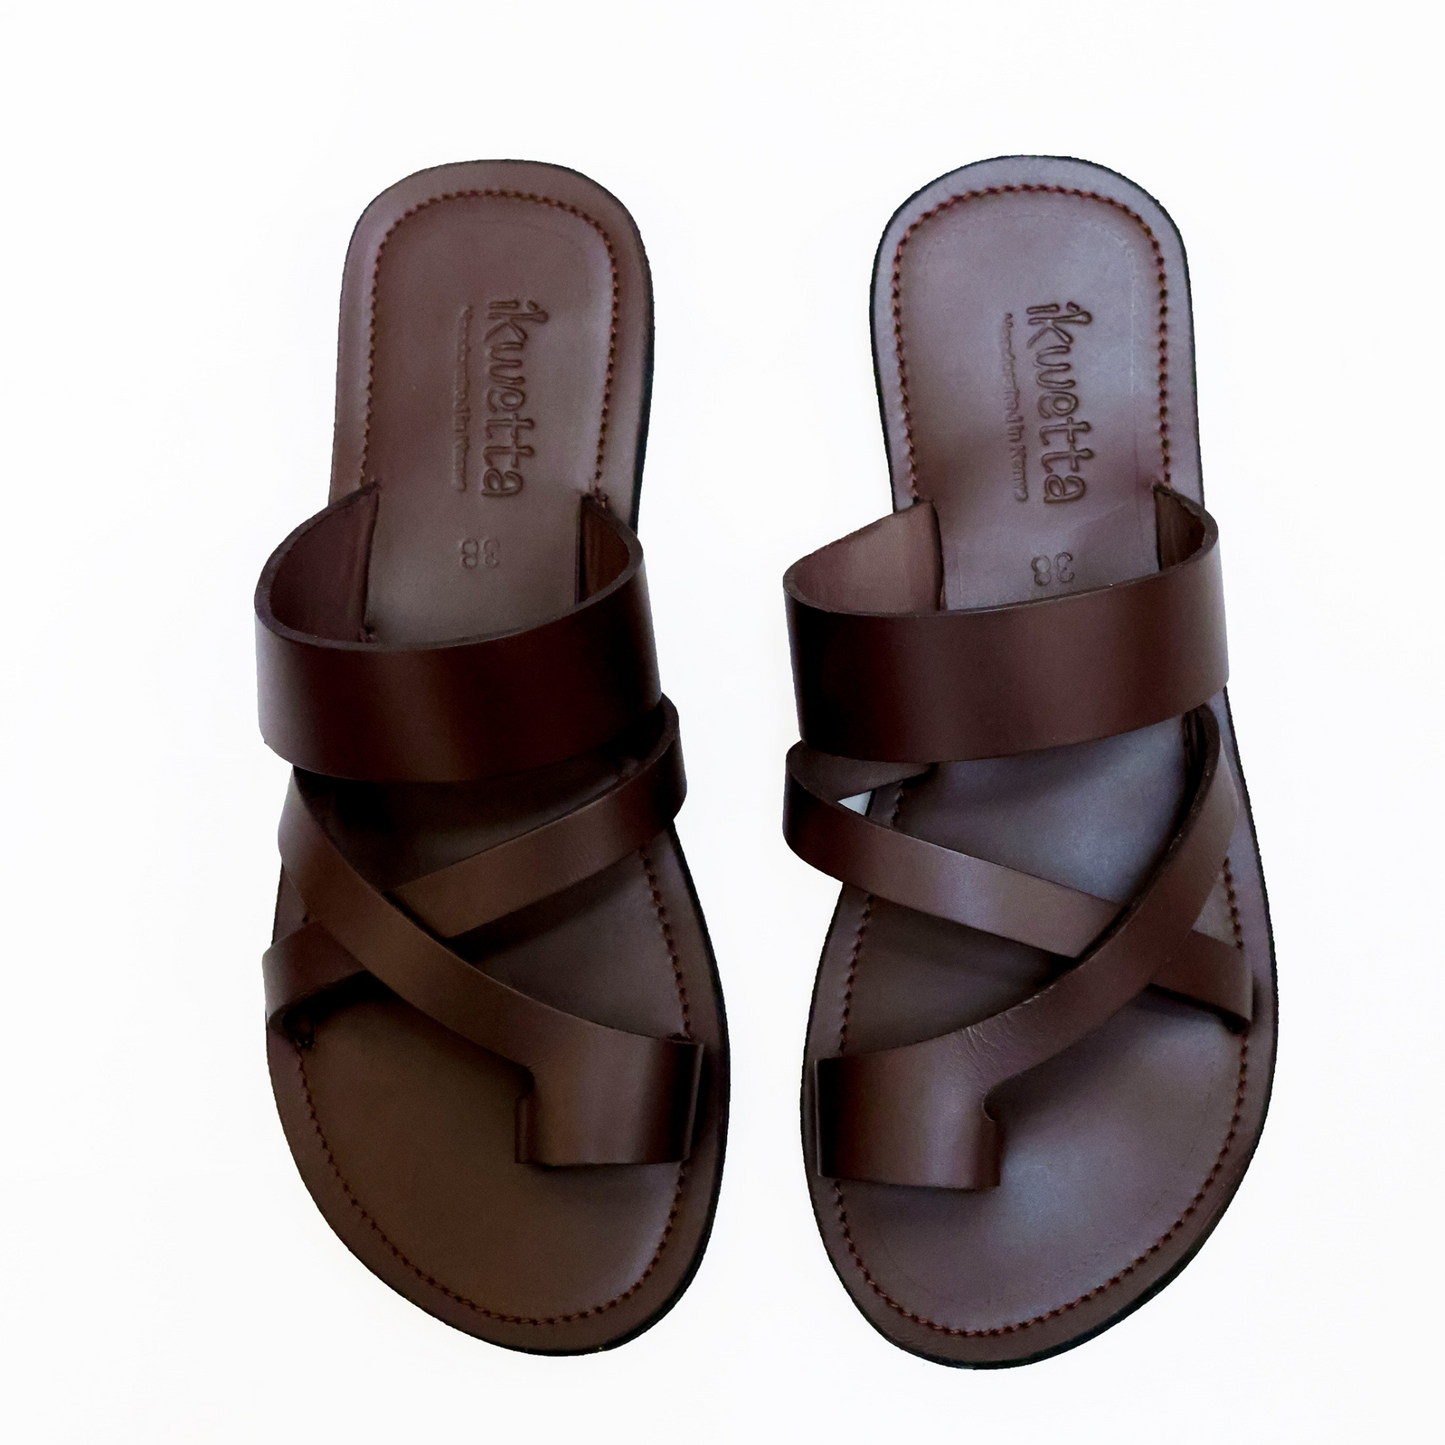 Olivia sandals in chocolate brown smooth leather and rubber sole.